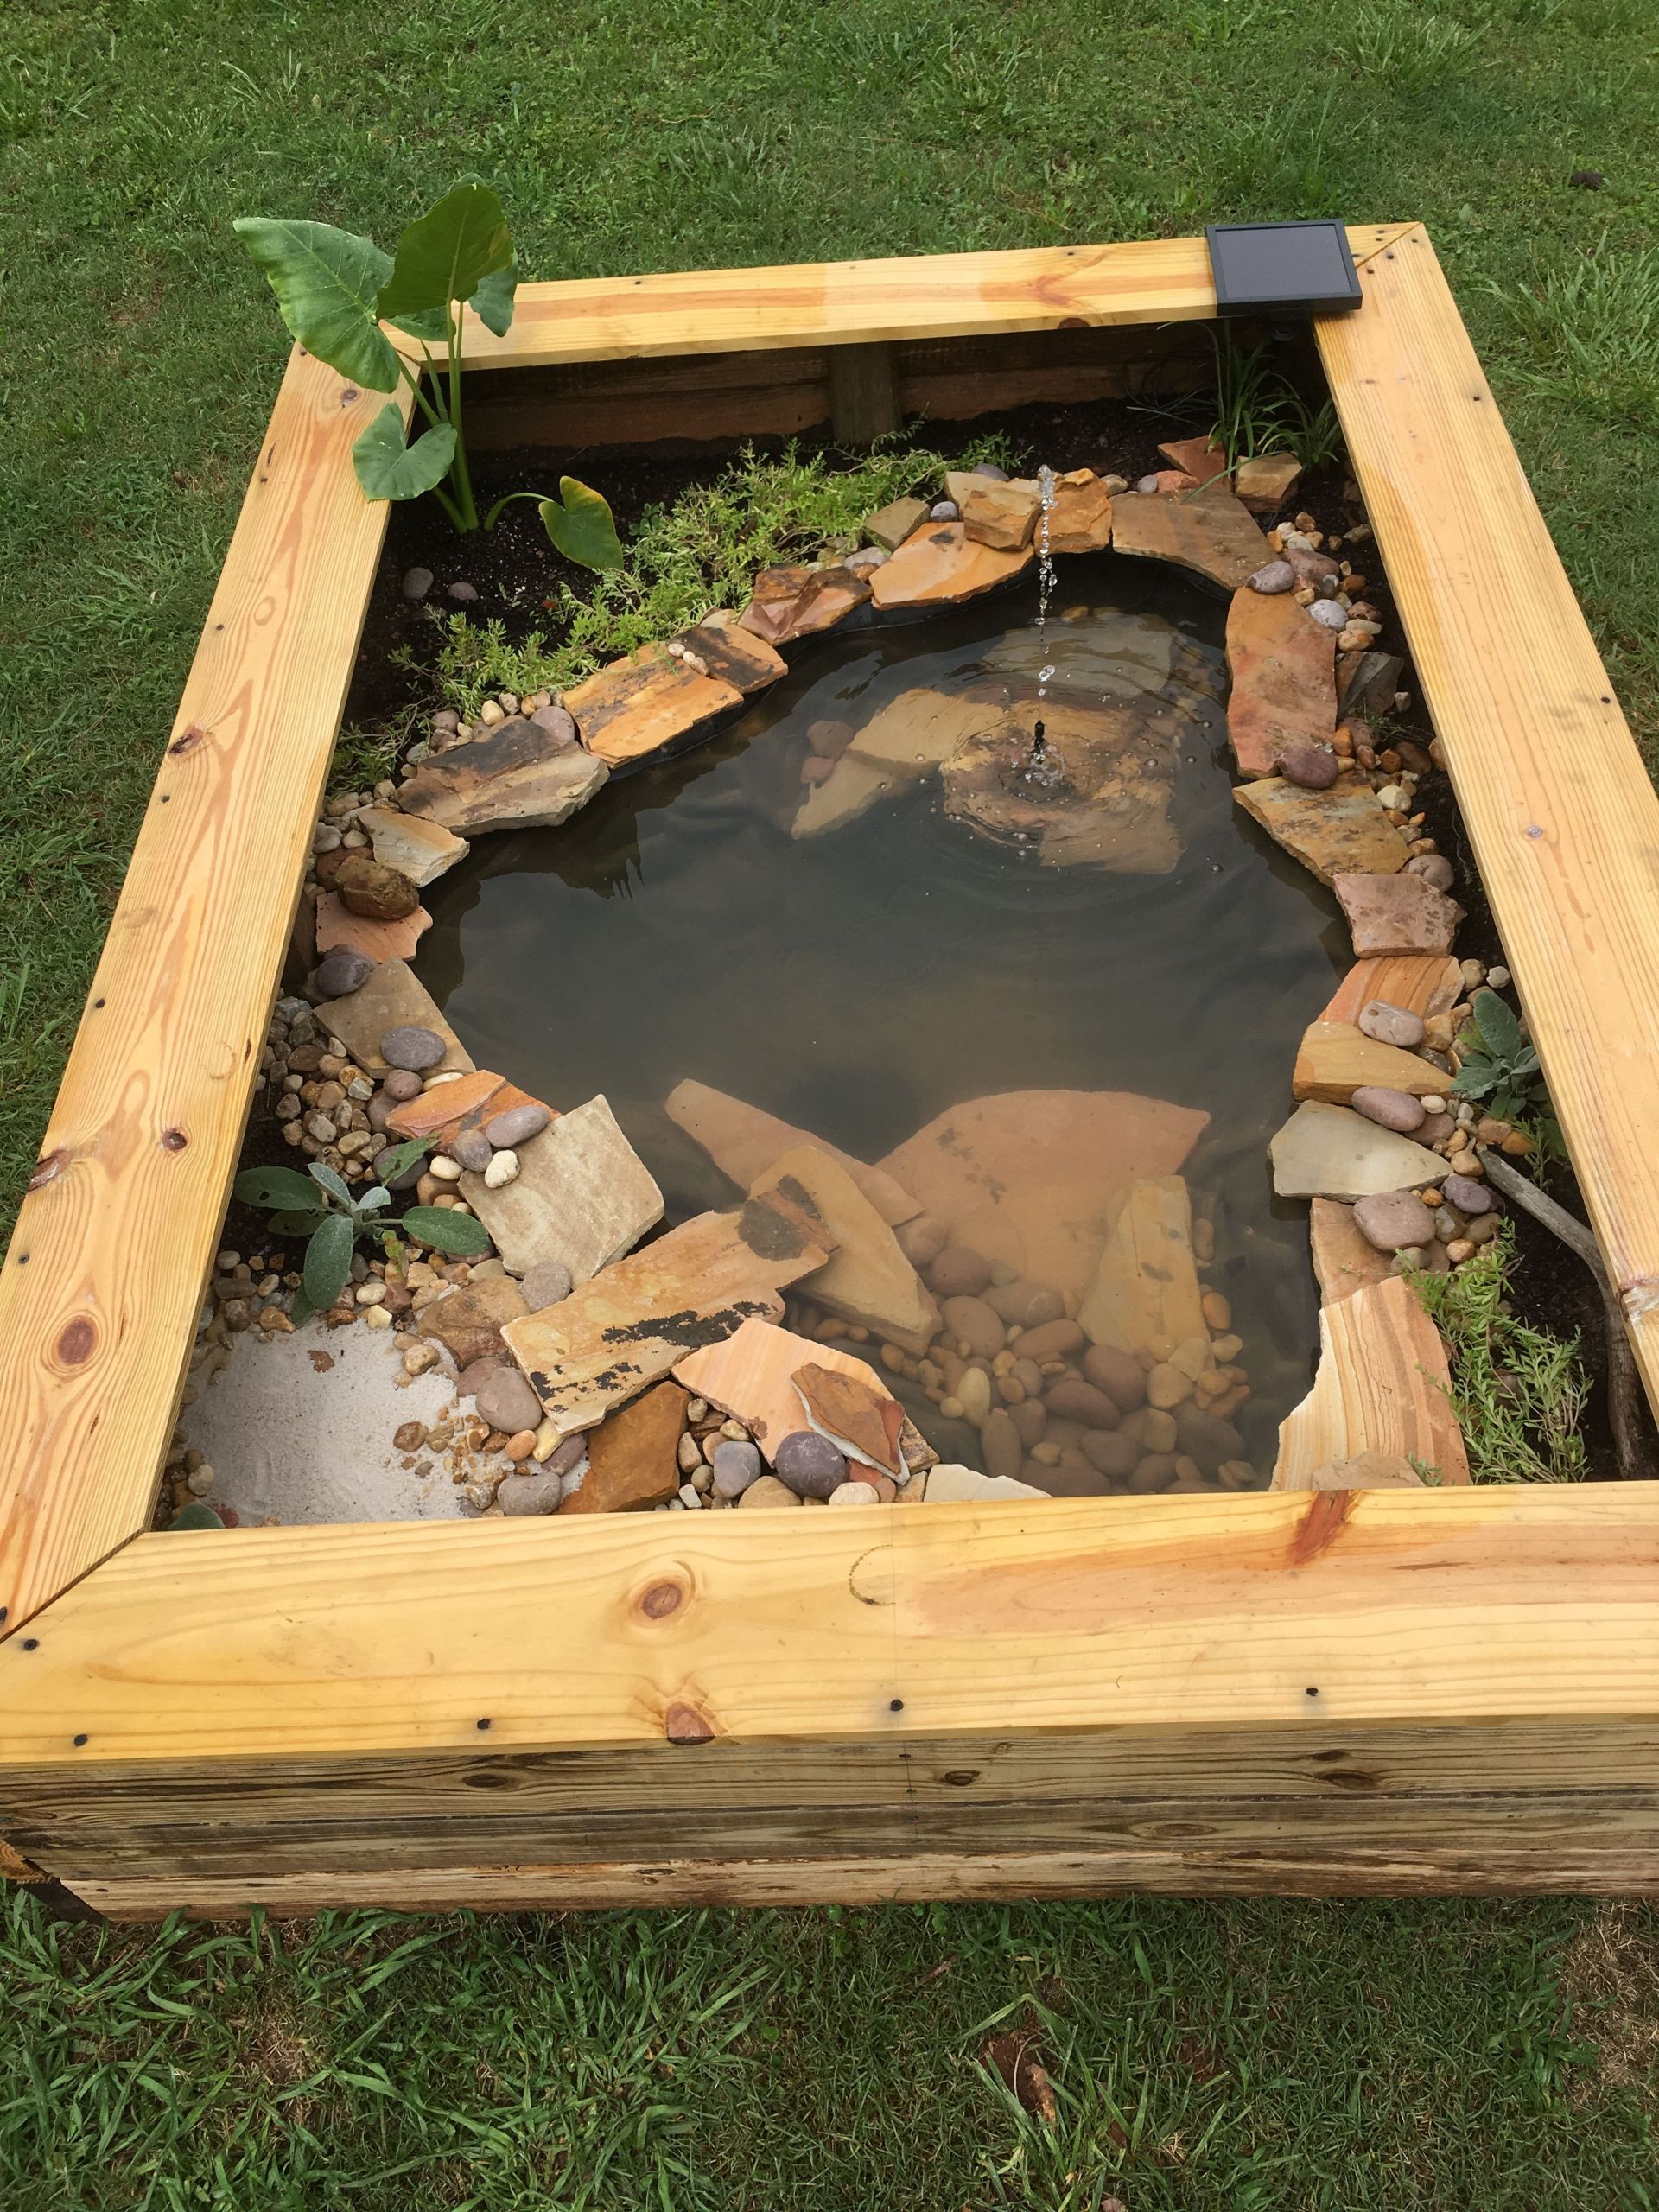 Diy Above Ground Koi Pond
 1000 images about above ground ponds on Pinterest